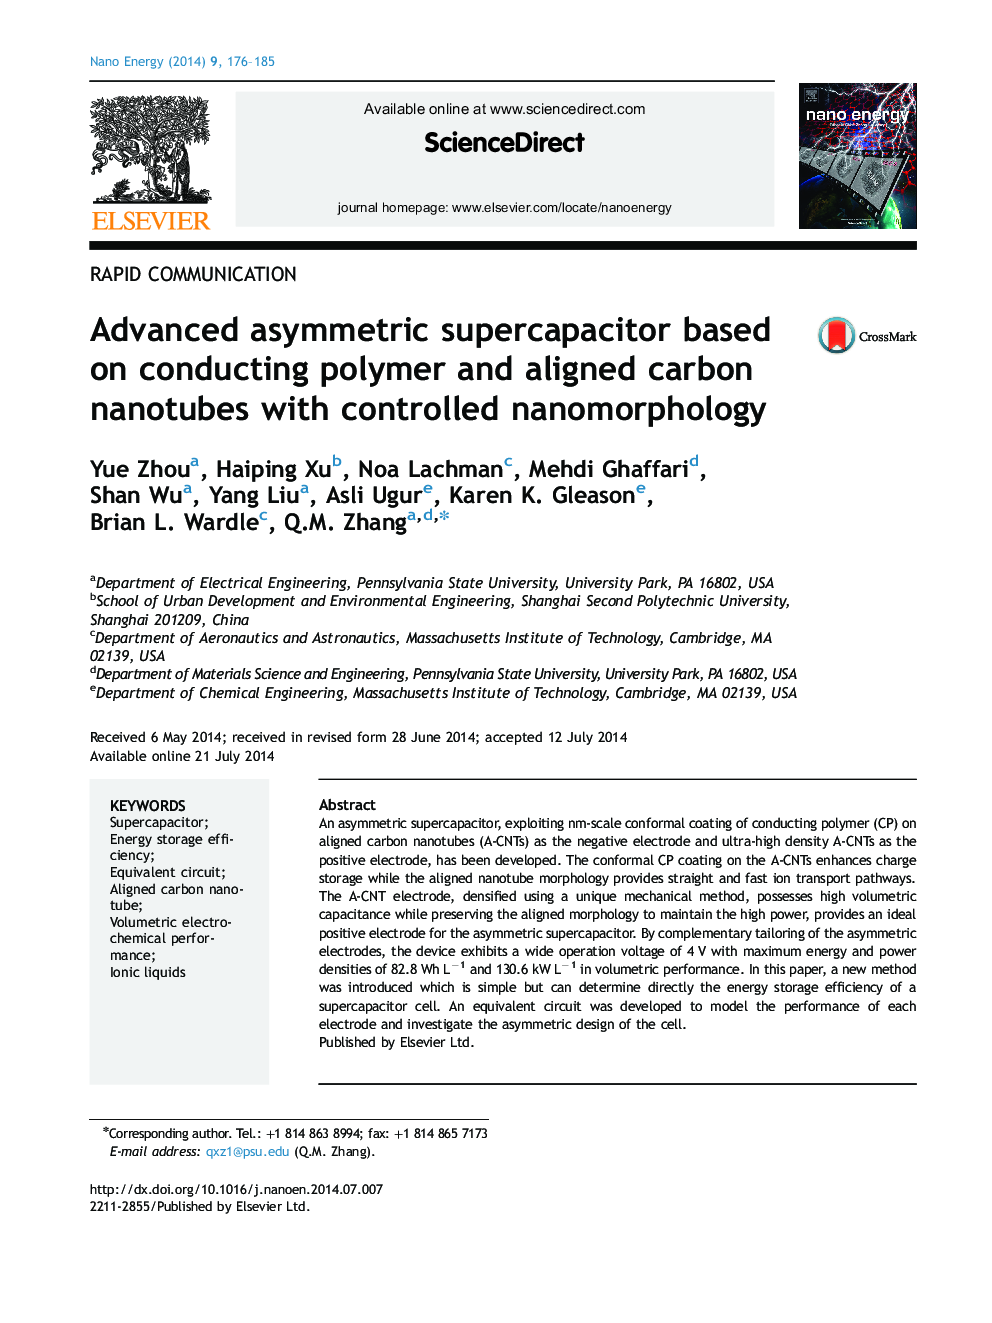 Advanced asymmetric supercapacitor based on conducting polymer and aligned carbon nanotubes with controlled nanomorphology